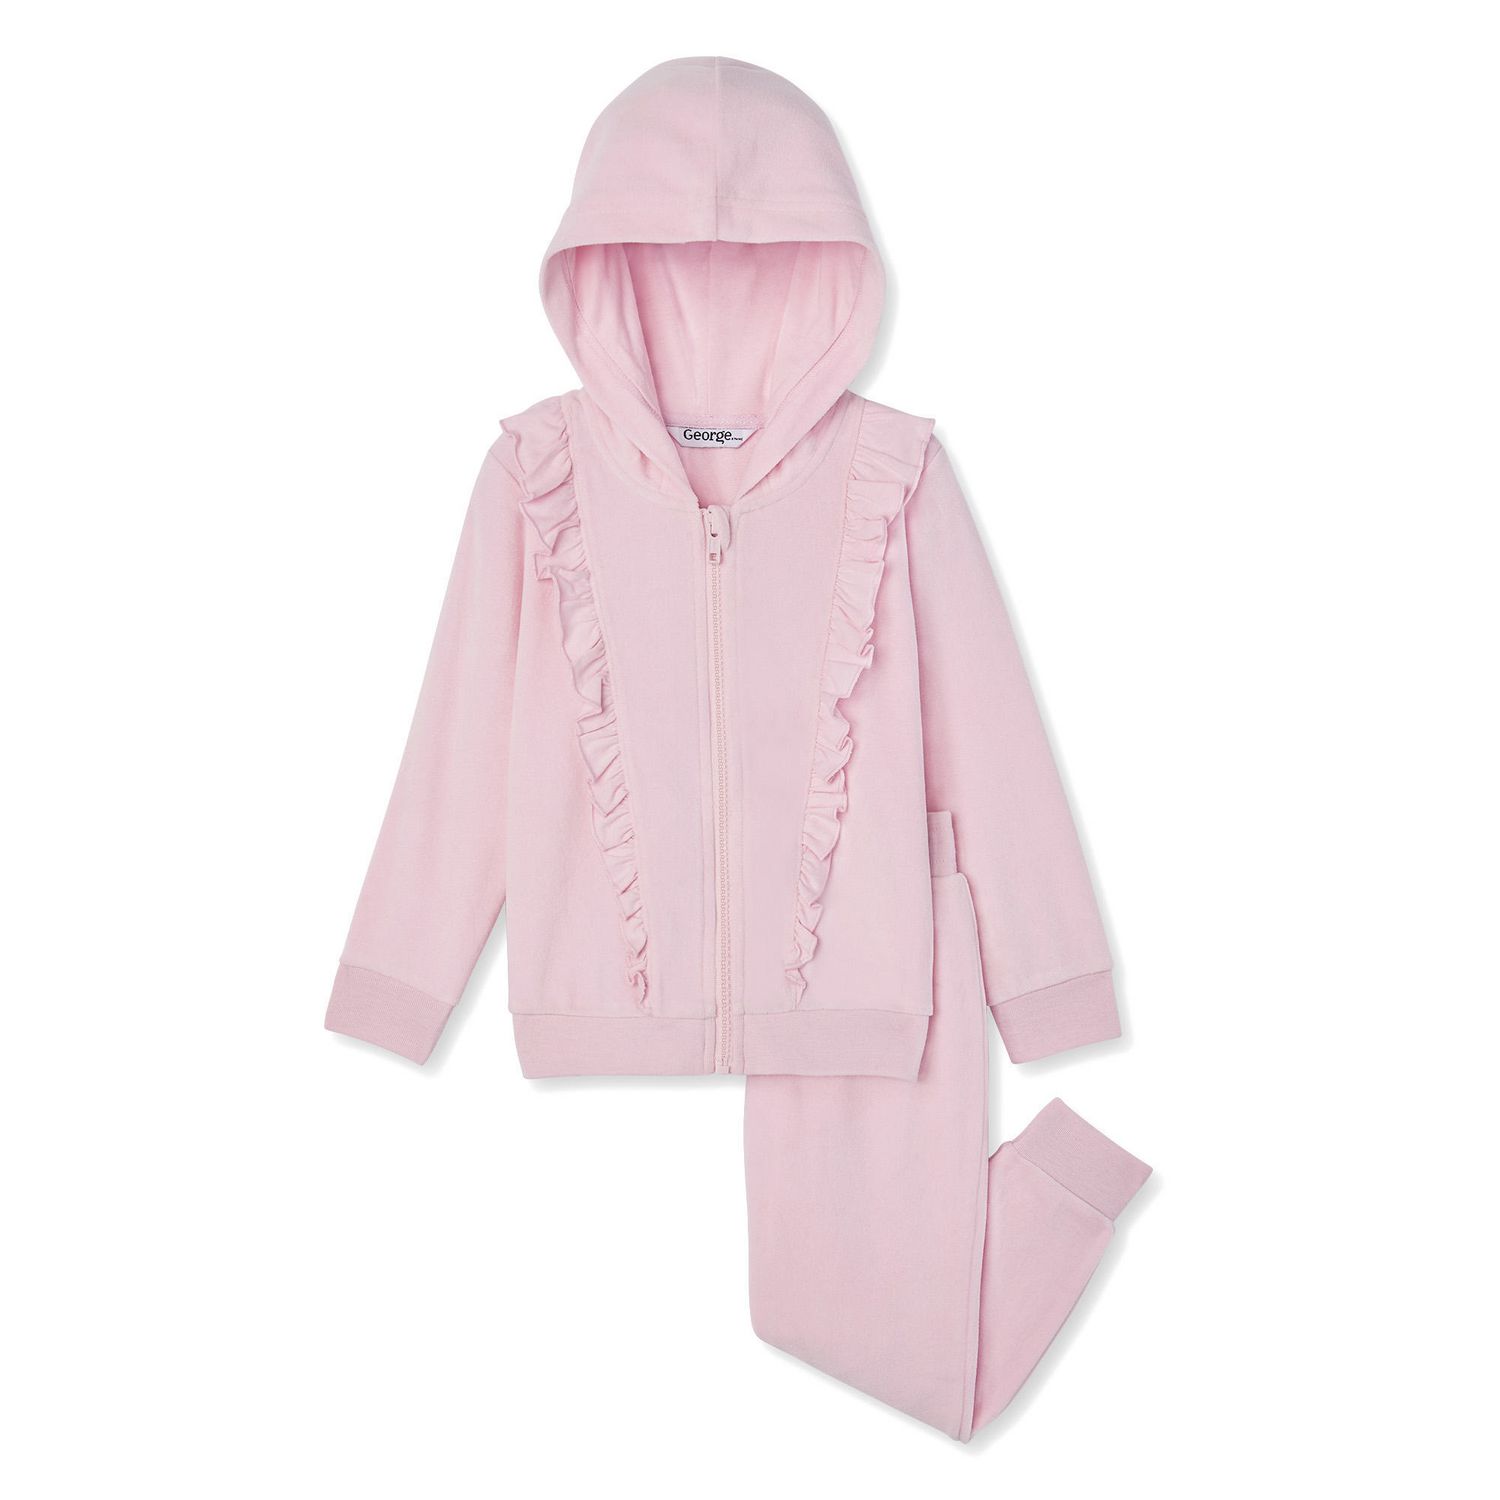 George Toddler Girls' Velour Ruffle Hoodie and Jogger Set | Walmart Canada